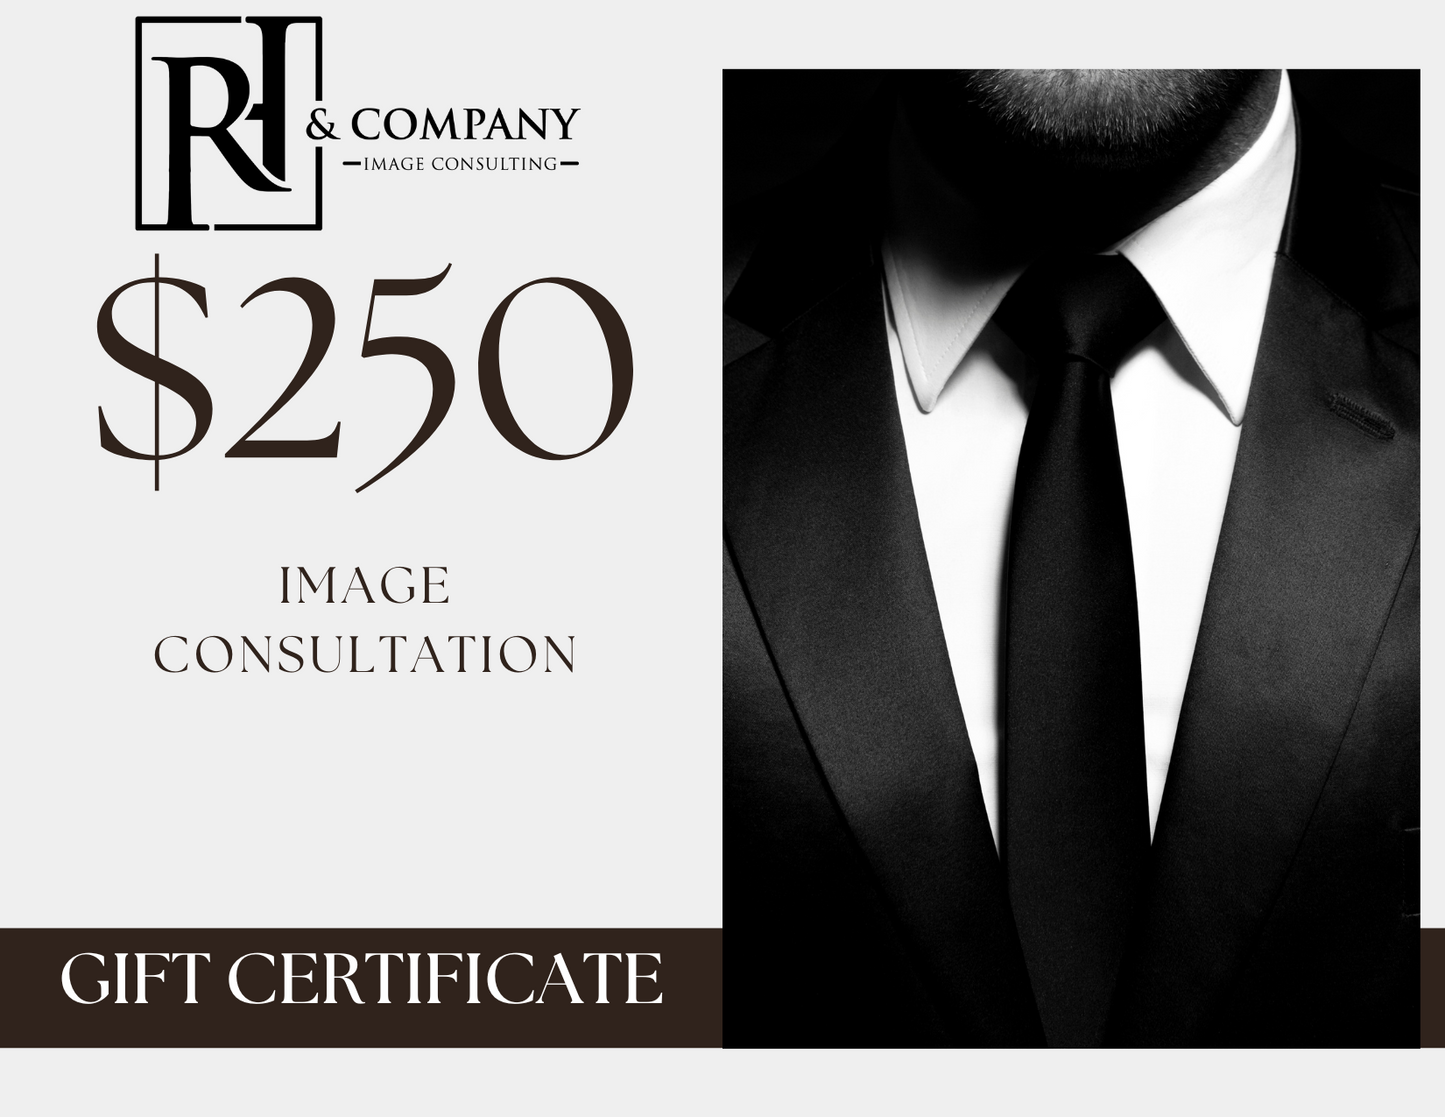 RH & Company Image Consulting Gift Card